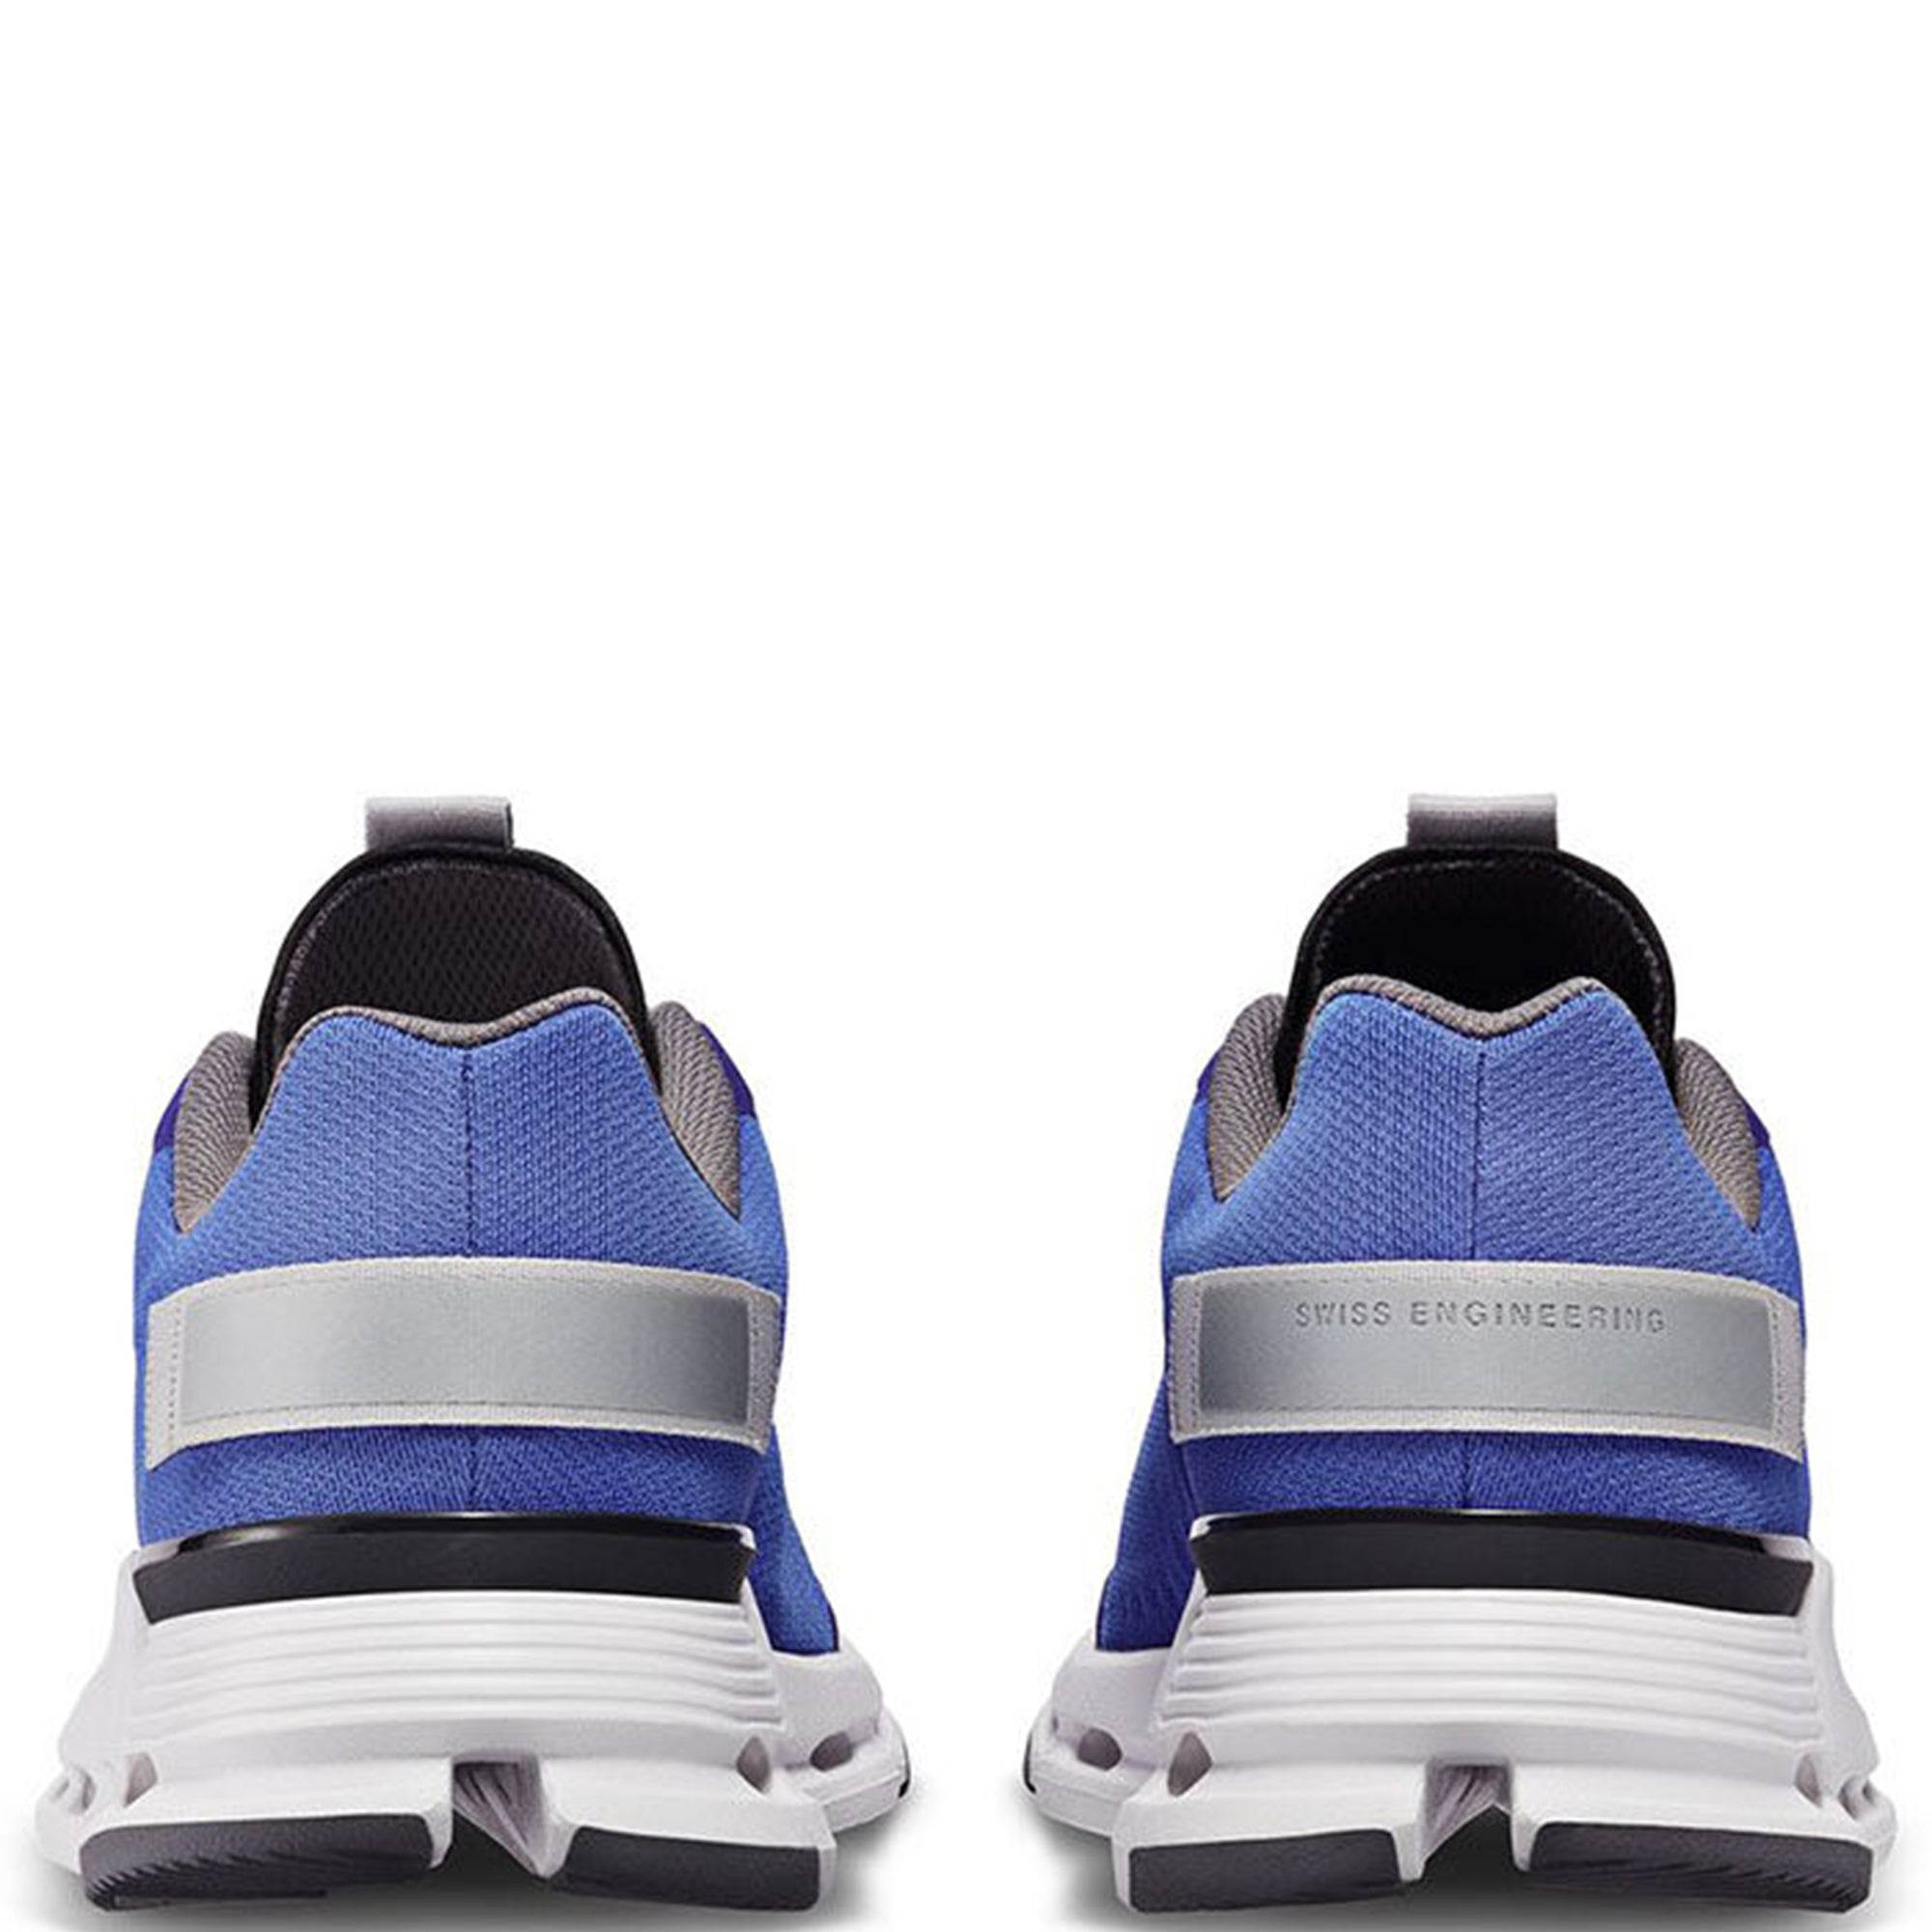 On Running Mens Cloudnova Form Trainers Blue